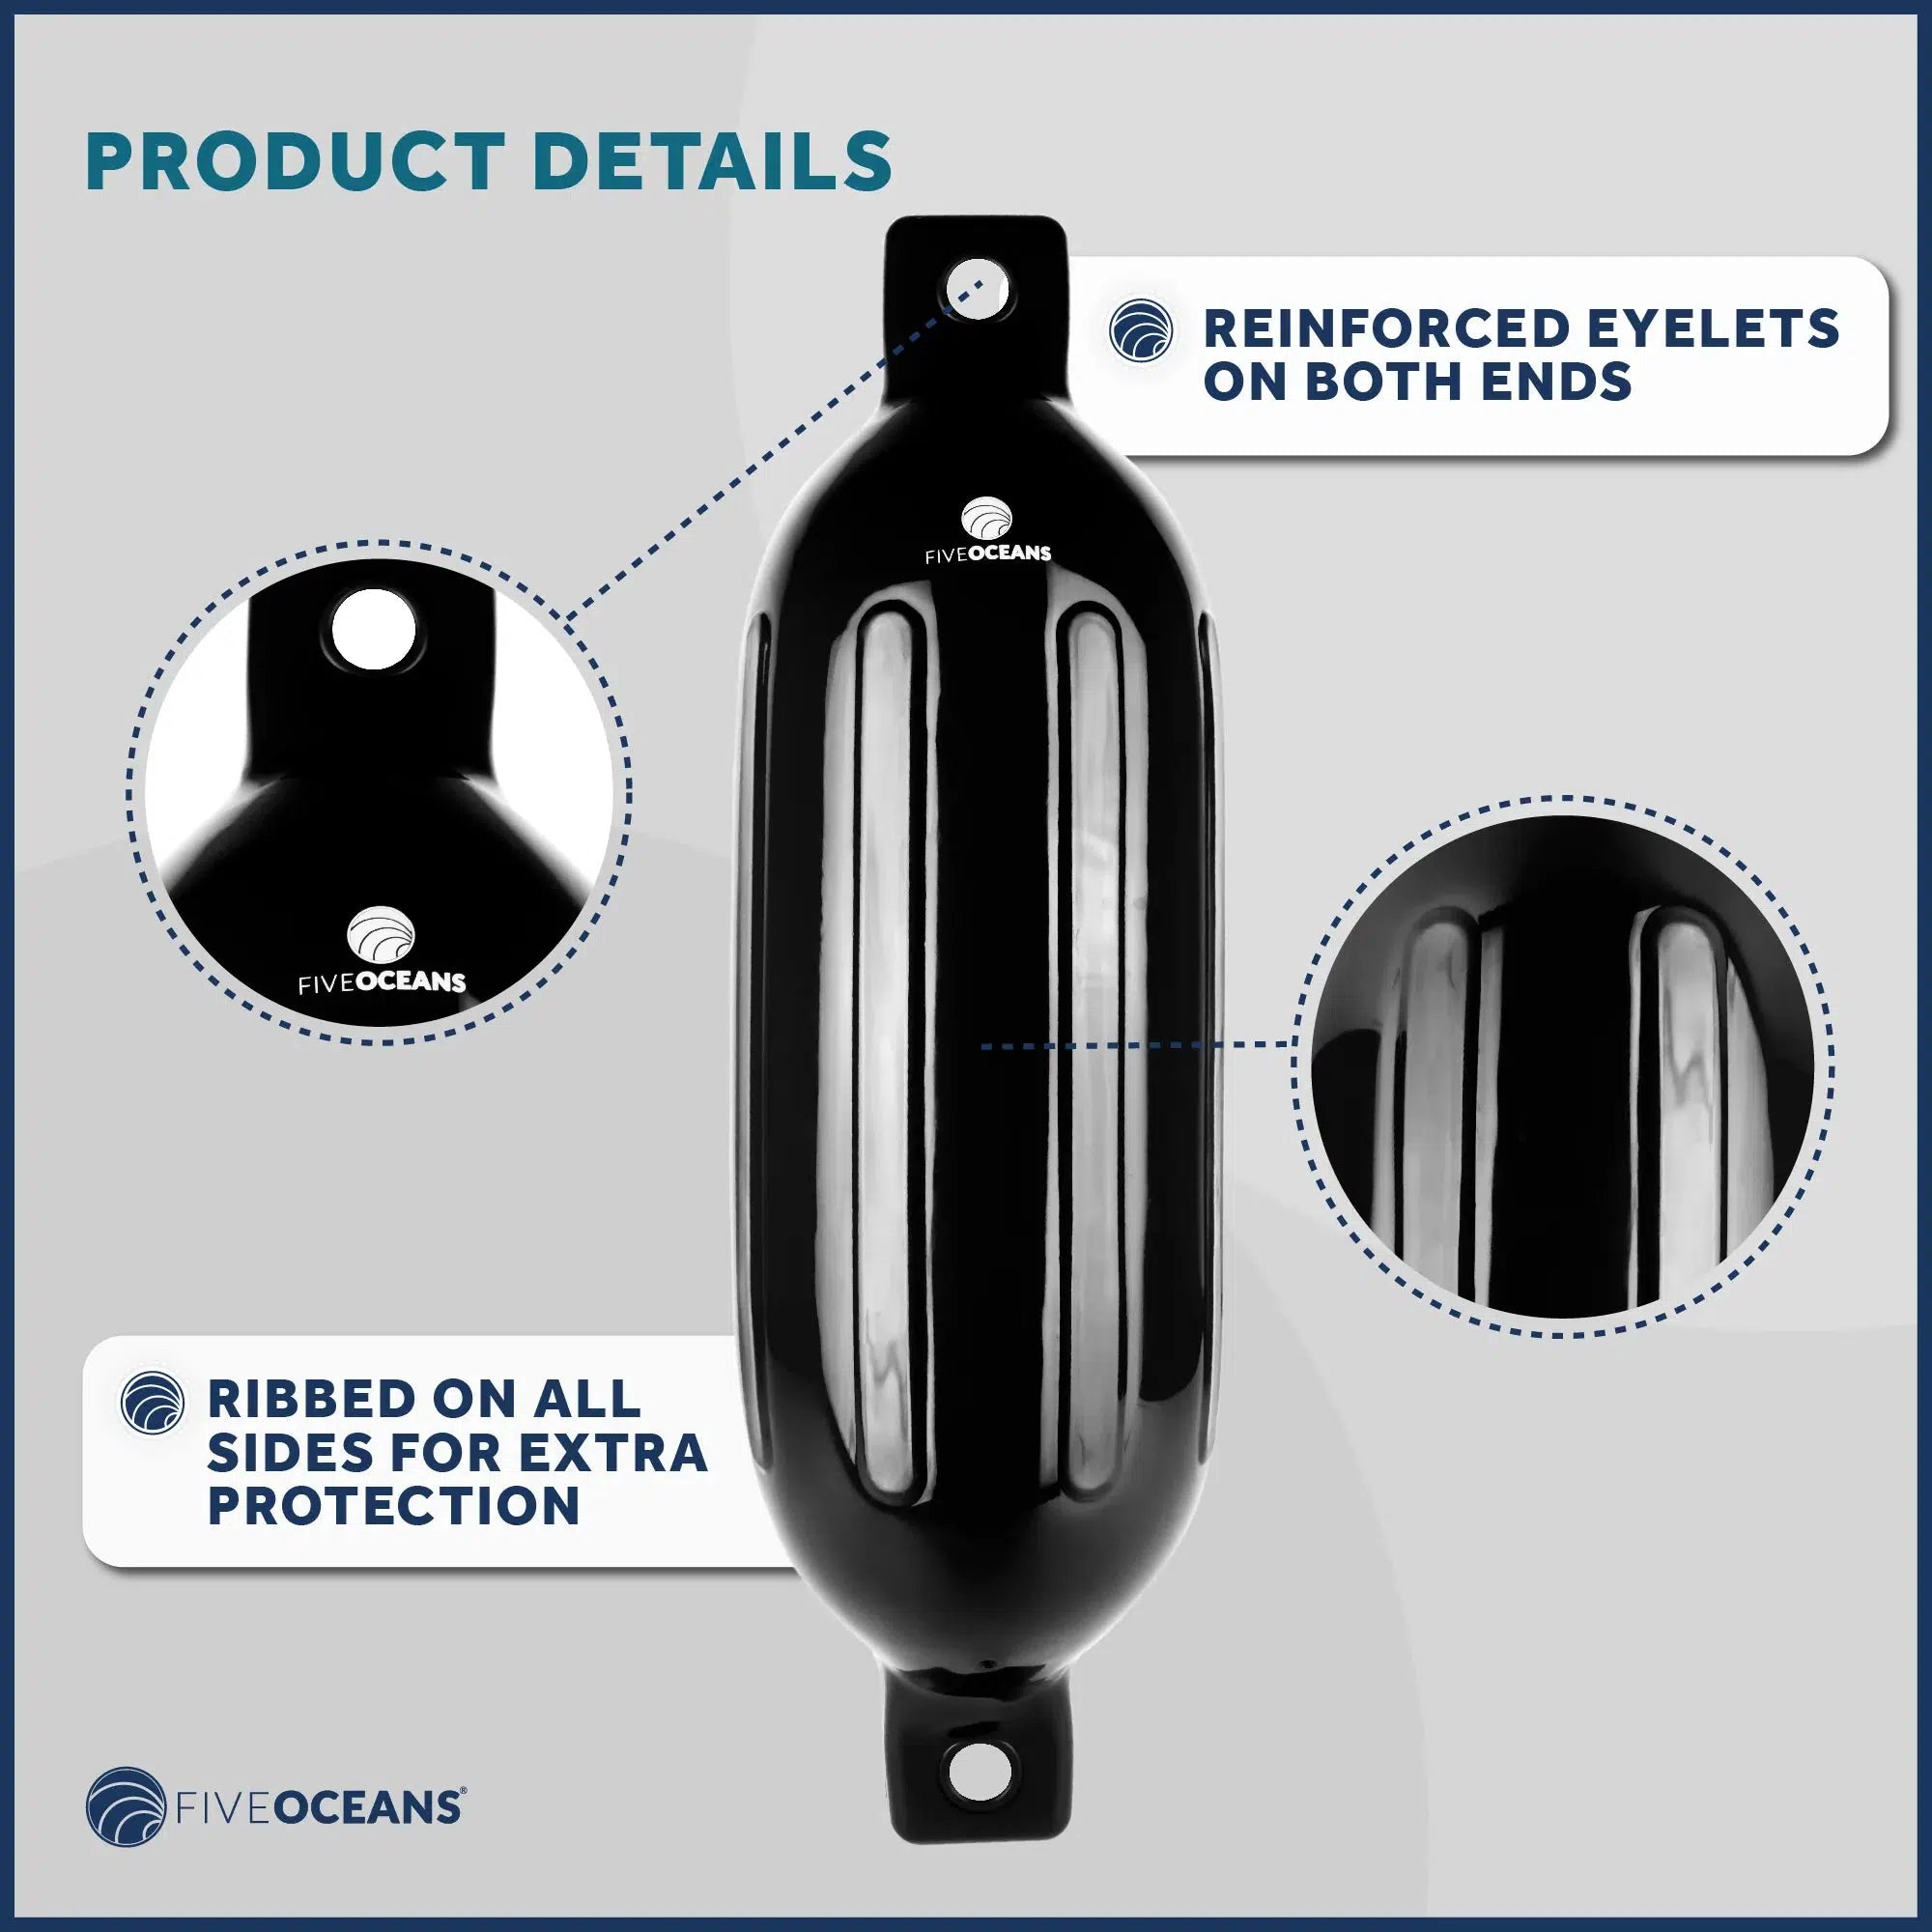 Black Inflatable Ribbed Boat Fender | 6.5x23 inches with 3/8 inches Fender Line | Integrated Needle Valve with 4 Needles | 4-Pack-Canadian Marine &amp; Outdoor Equipment